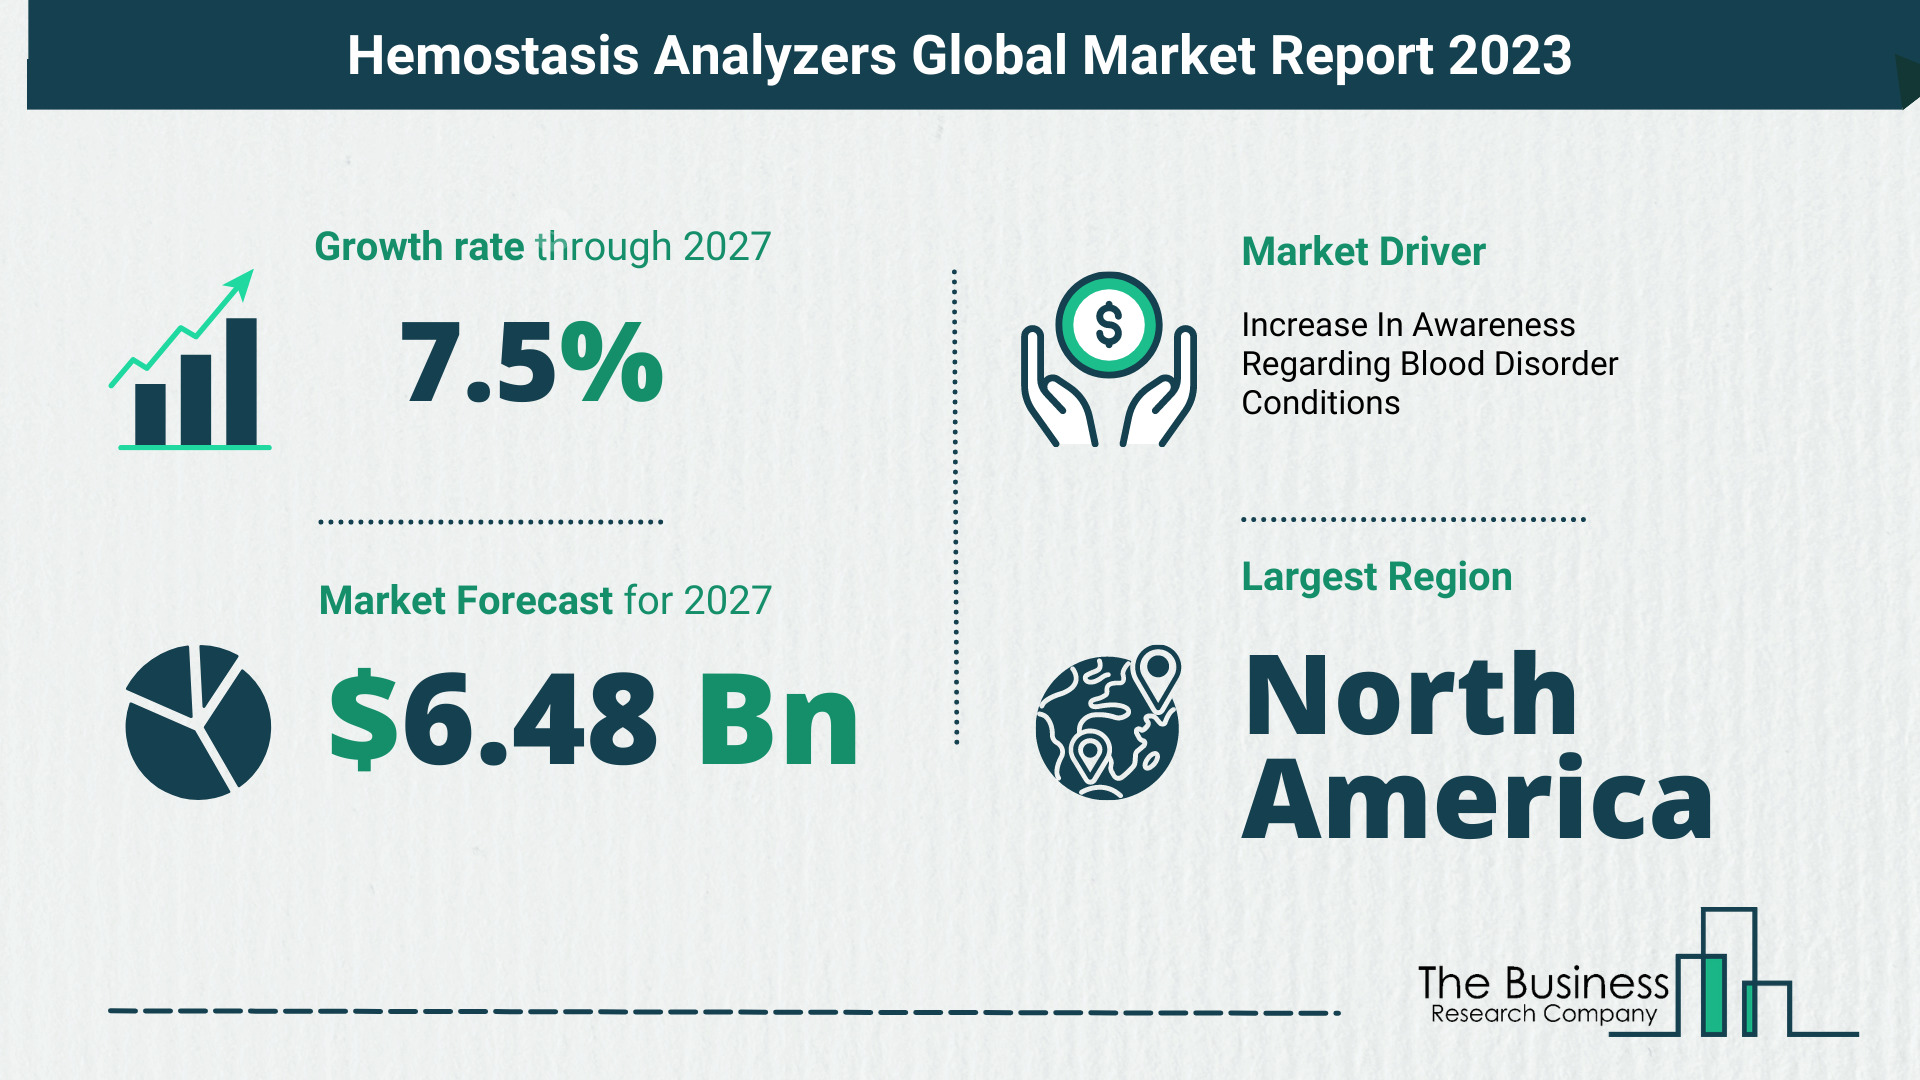 How Will The Hemostasis Analyzers Market Size Grow In The Coming Years?